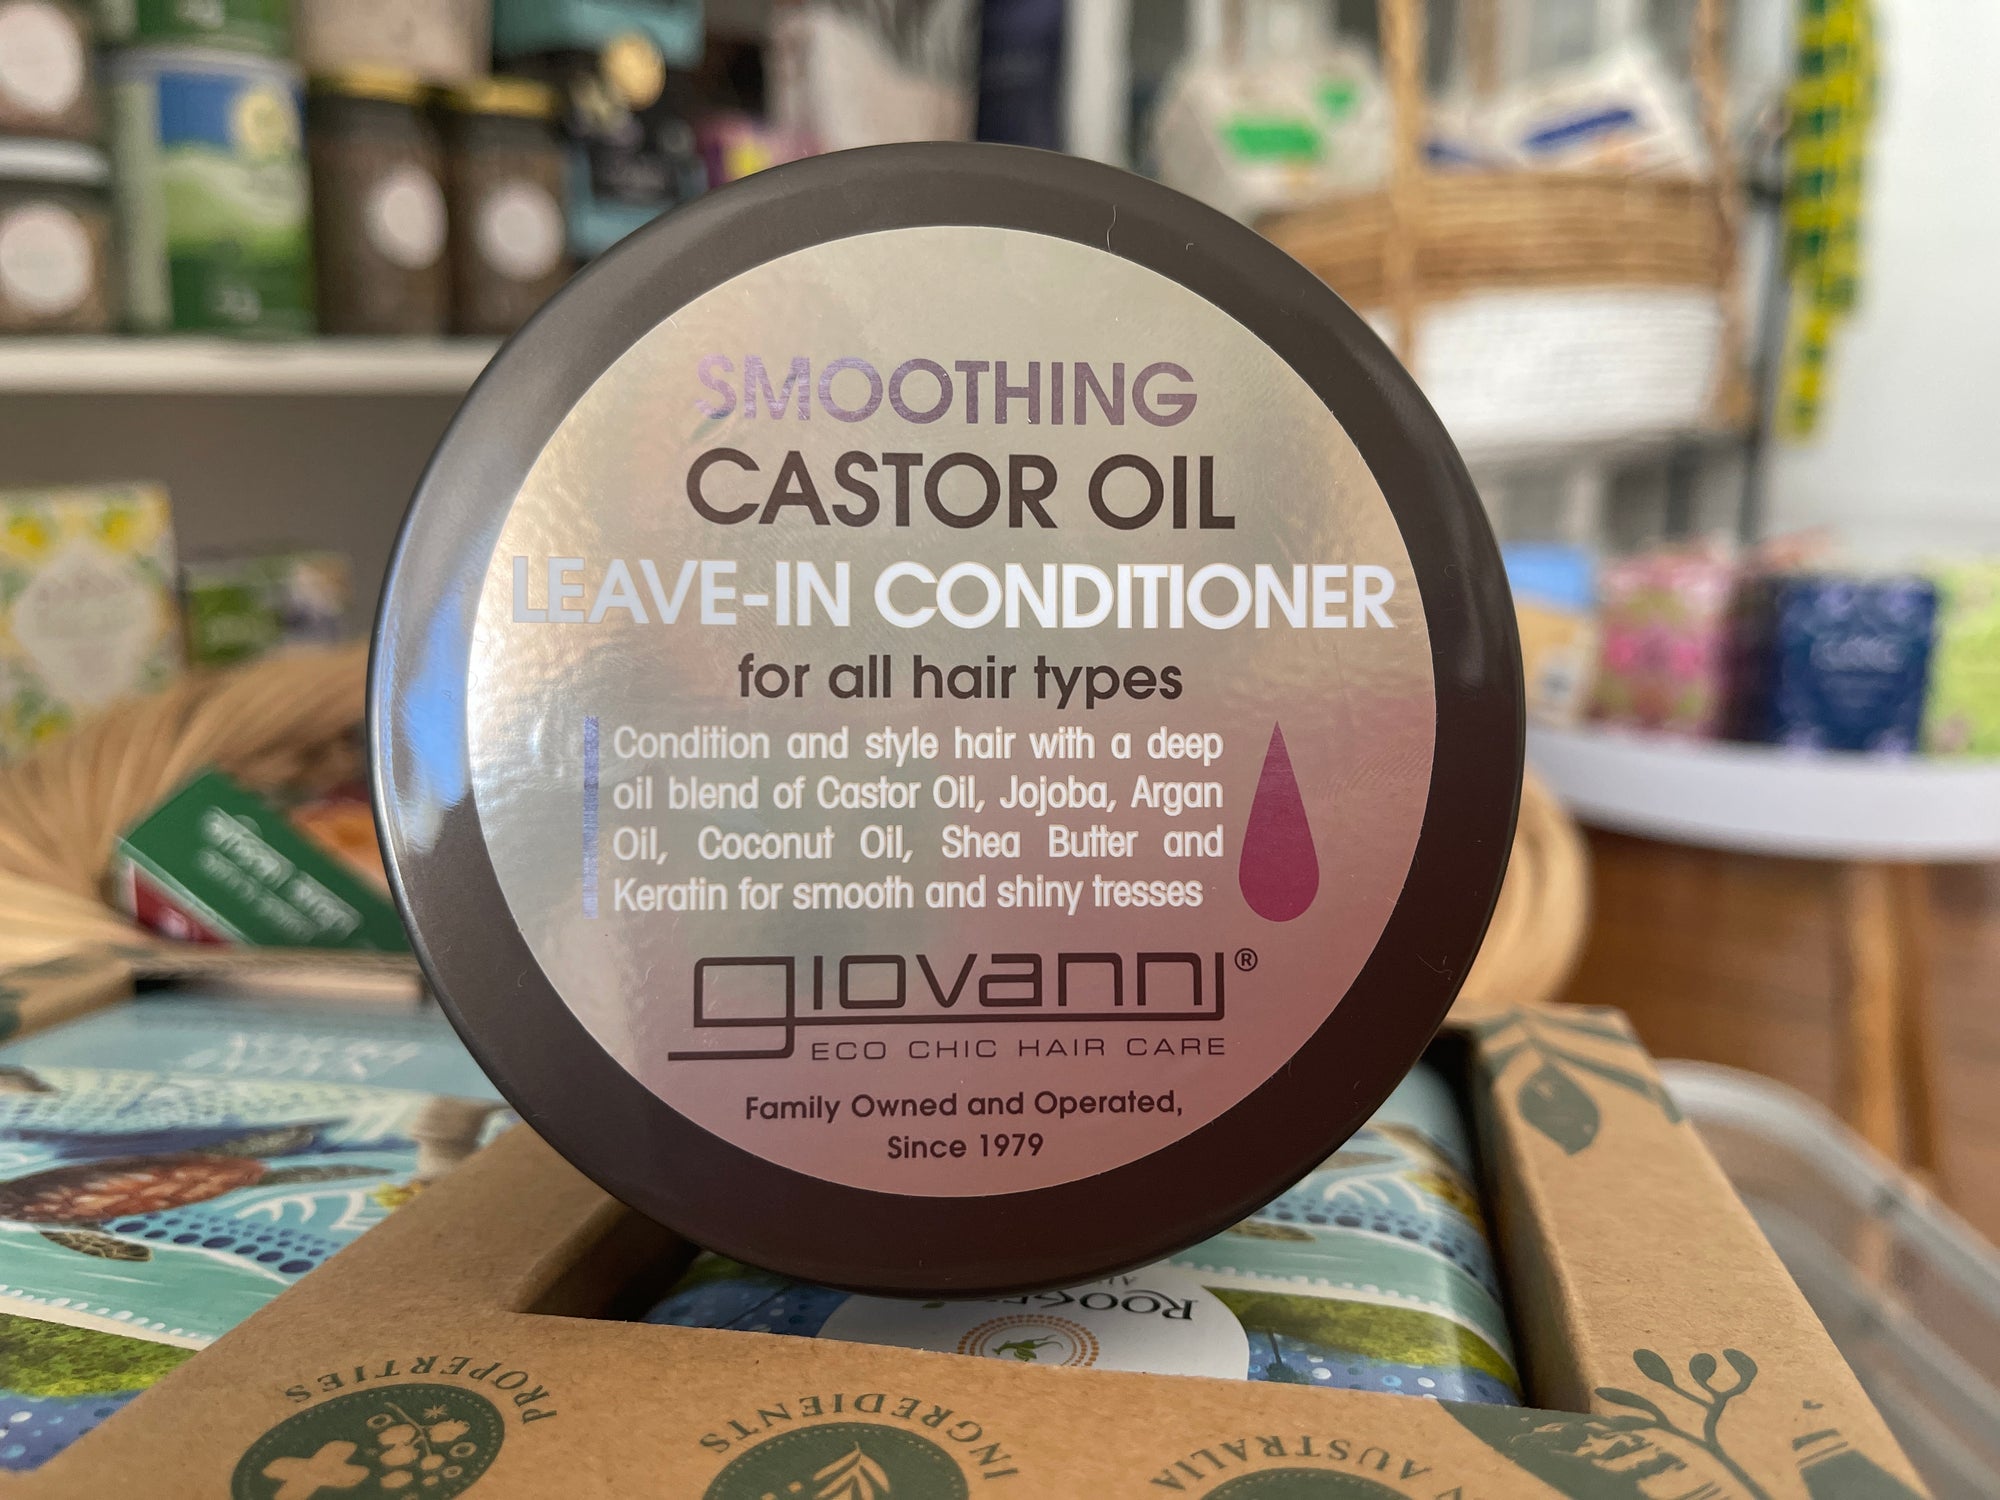 Smoothing Castor Oil Leave-In Conditioner 340ml